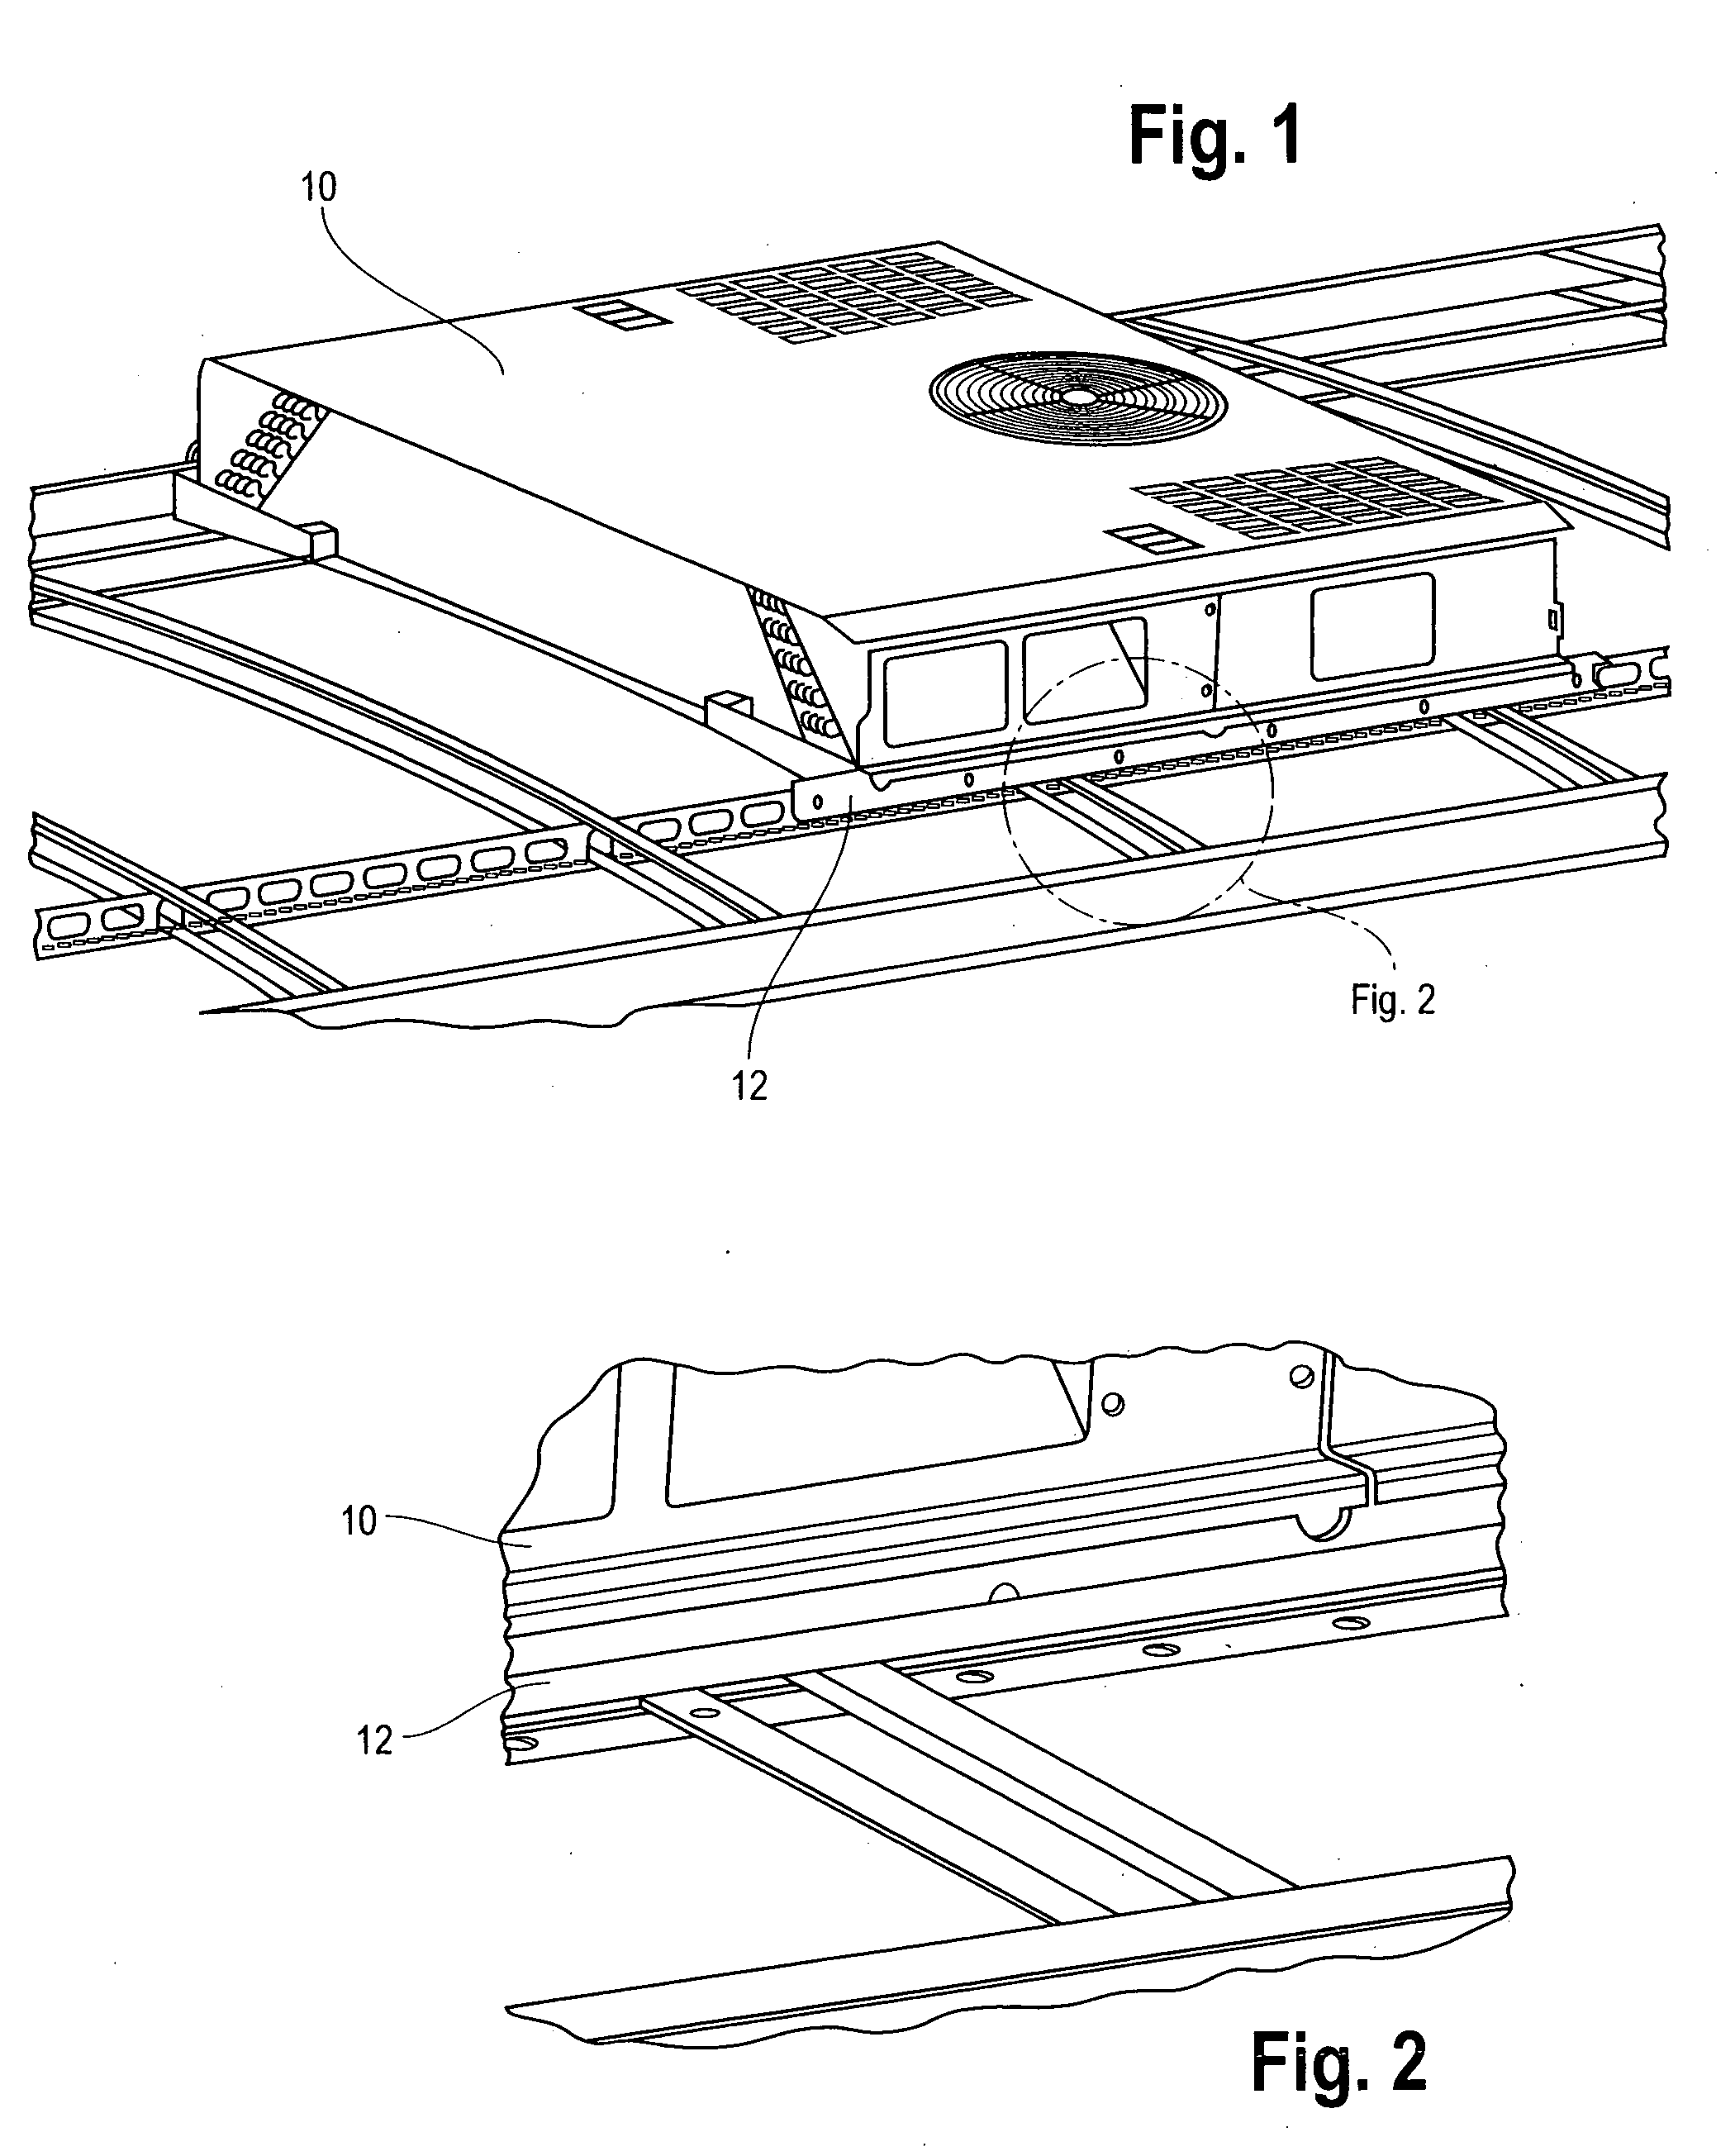 Modular rooftop air conditioning system mounting arrangement